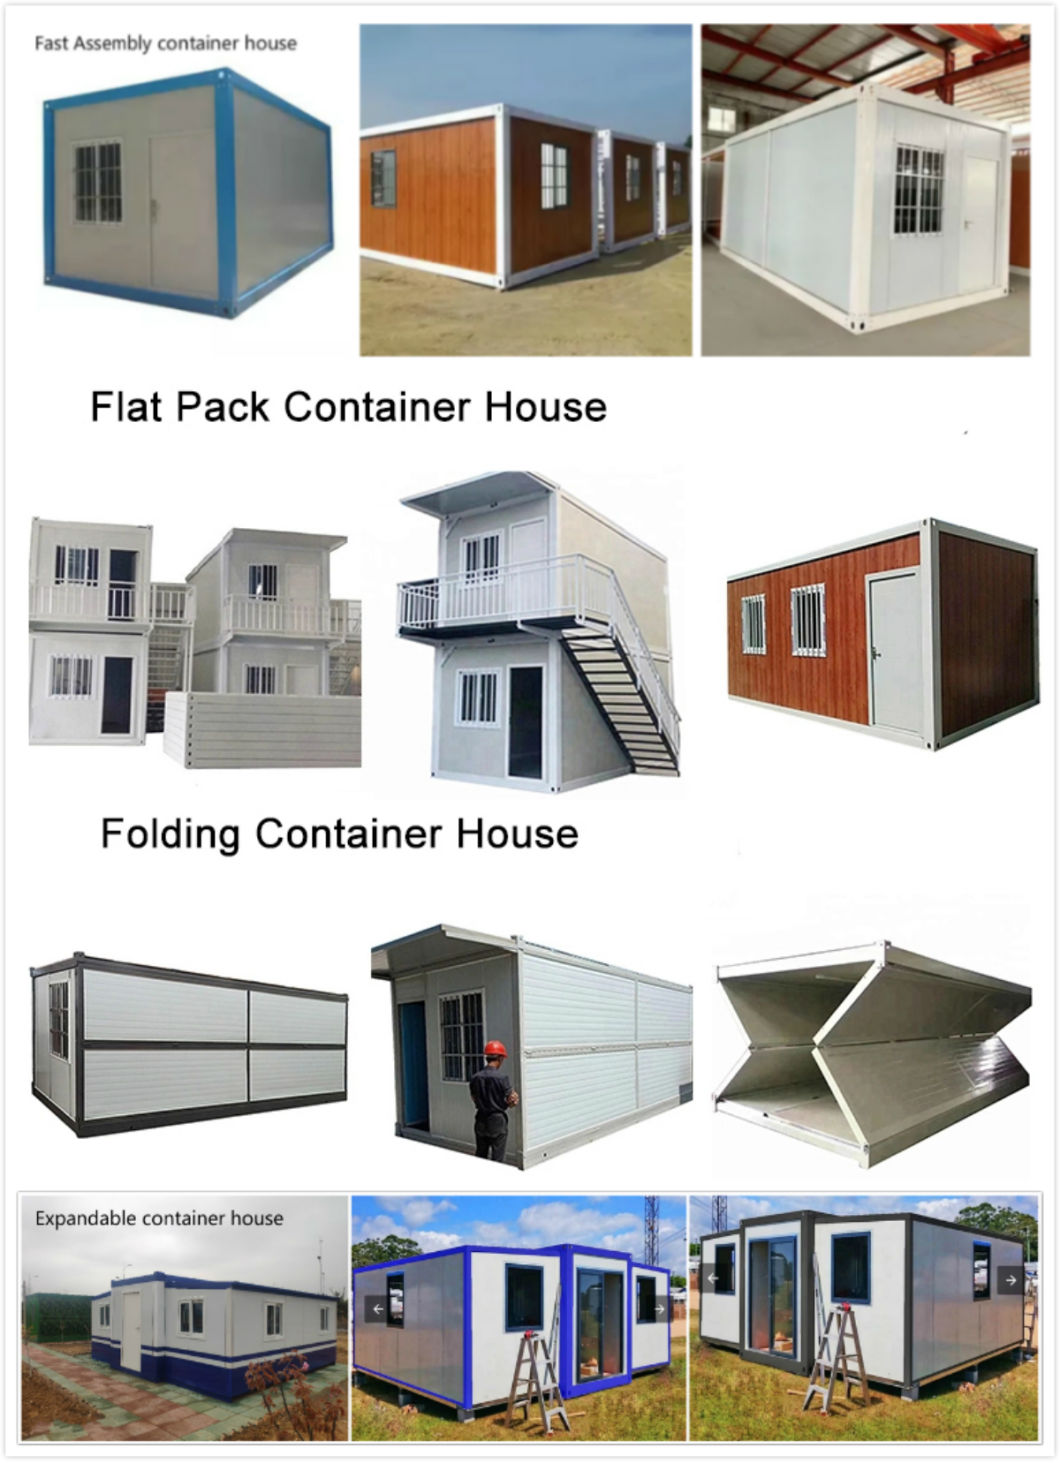 20FT 40FT 2 Bedroom 3 Bedroom Folding Foldable Expandable Granny Flat Prefabricated Container House 37 Sqm